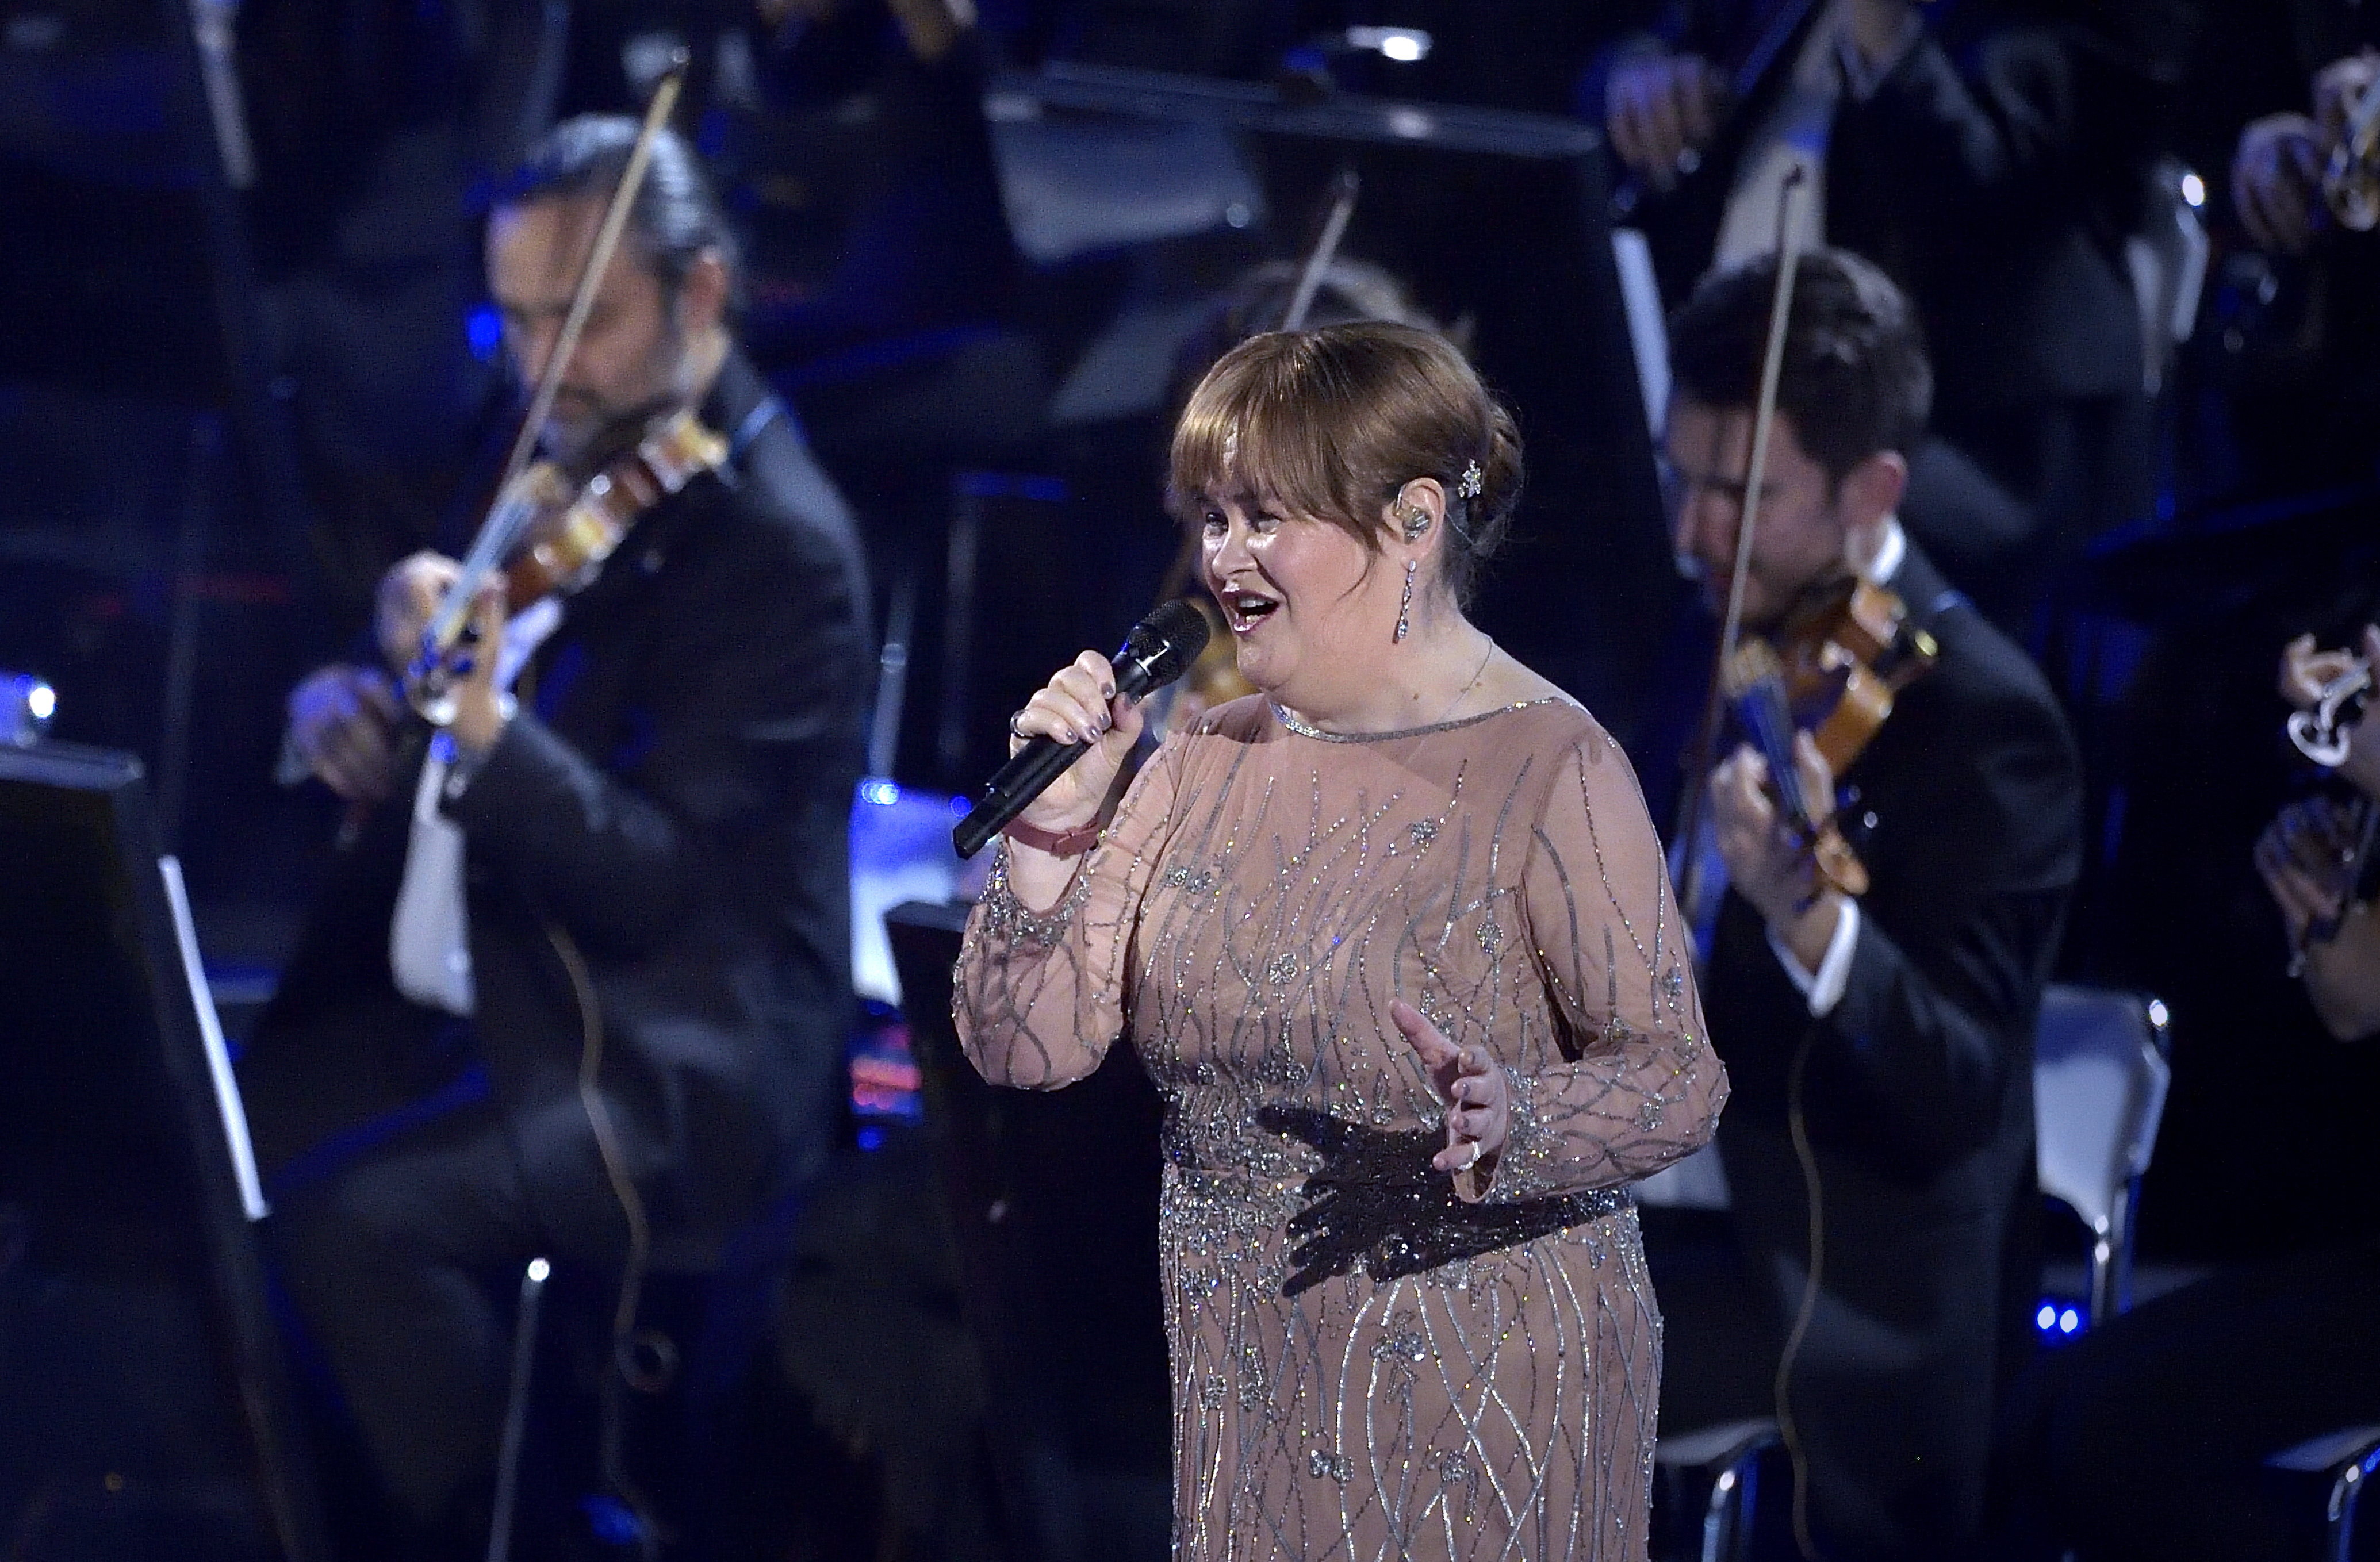 Susan Boyle performs during the Vatican annual Christmas concert on December 14, 2019 | Source: Getty Images